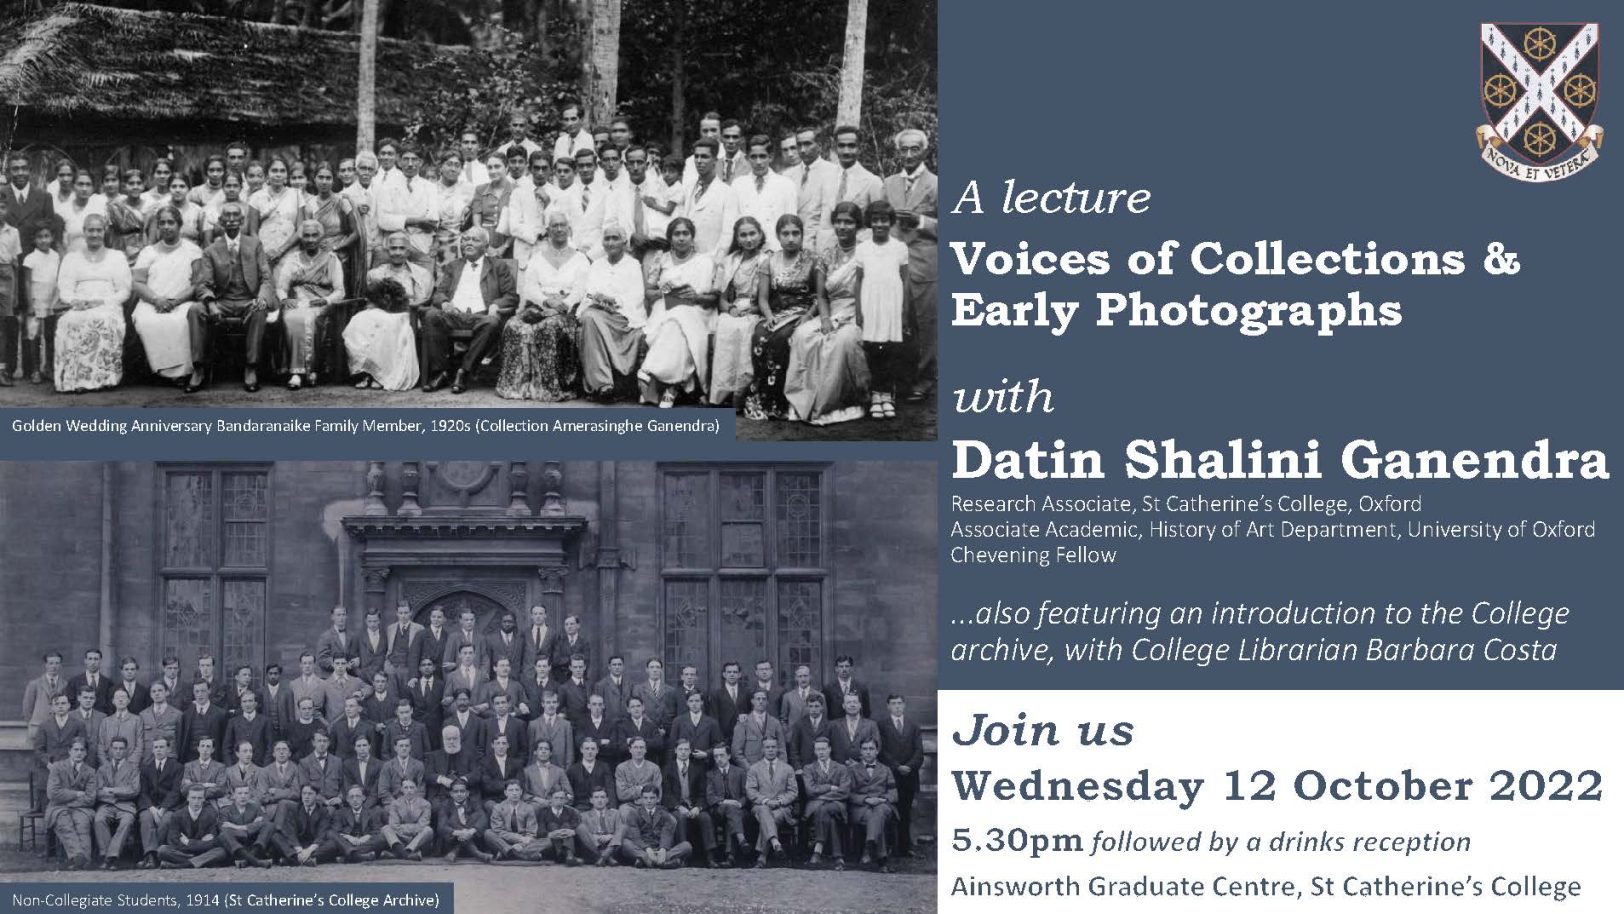 Two black-and-white photos: a family celebrating a wedding anniversary (1920s); a group photo of students (1914). Text reads: A lecture, Voices of Collections and Early Photographs with Datin Shalini Ganendra... also featuring an introduction to the College archive, with College Librarian Barbara Costa.